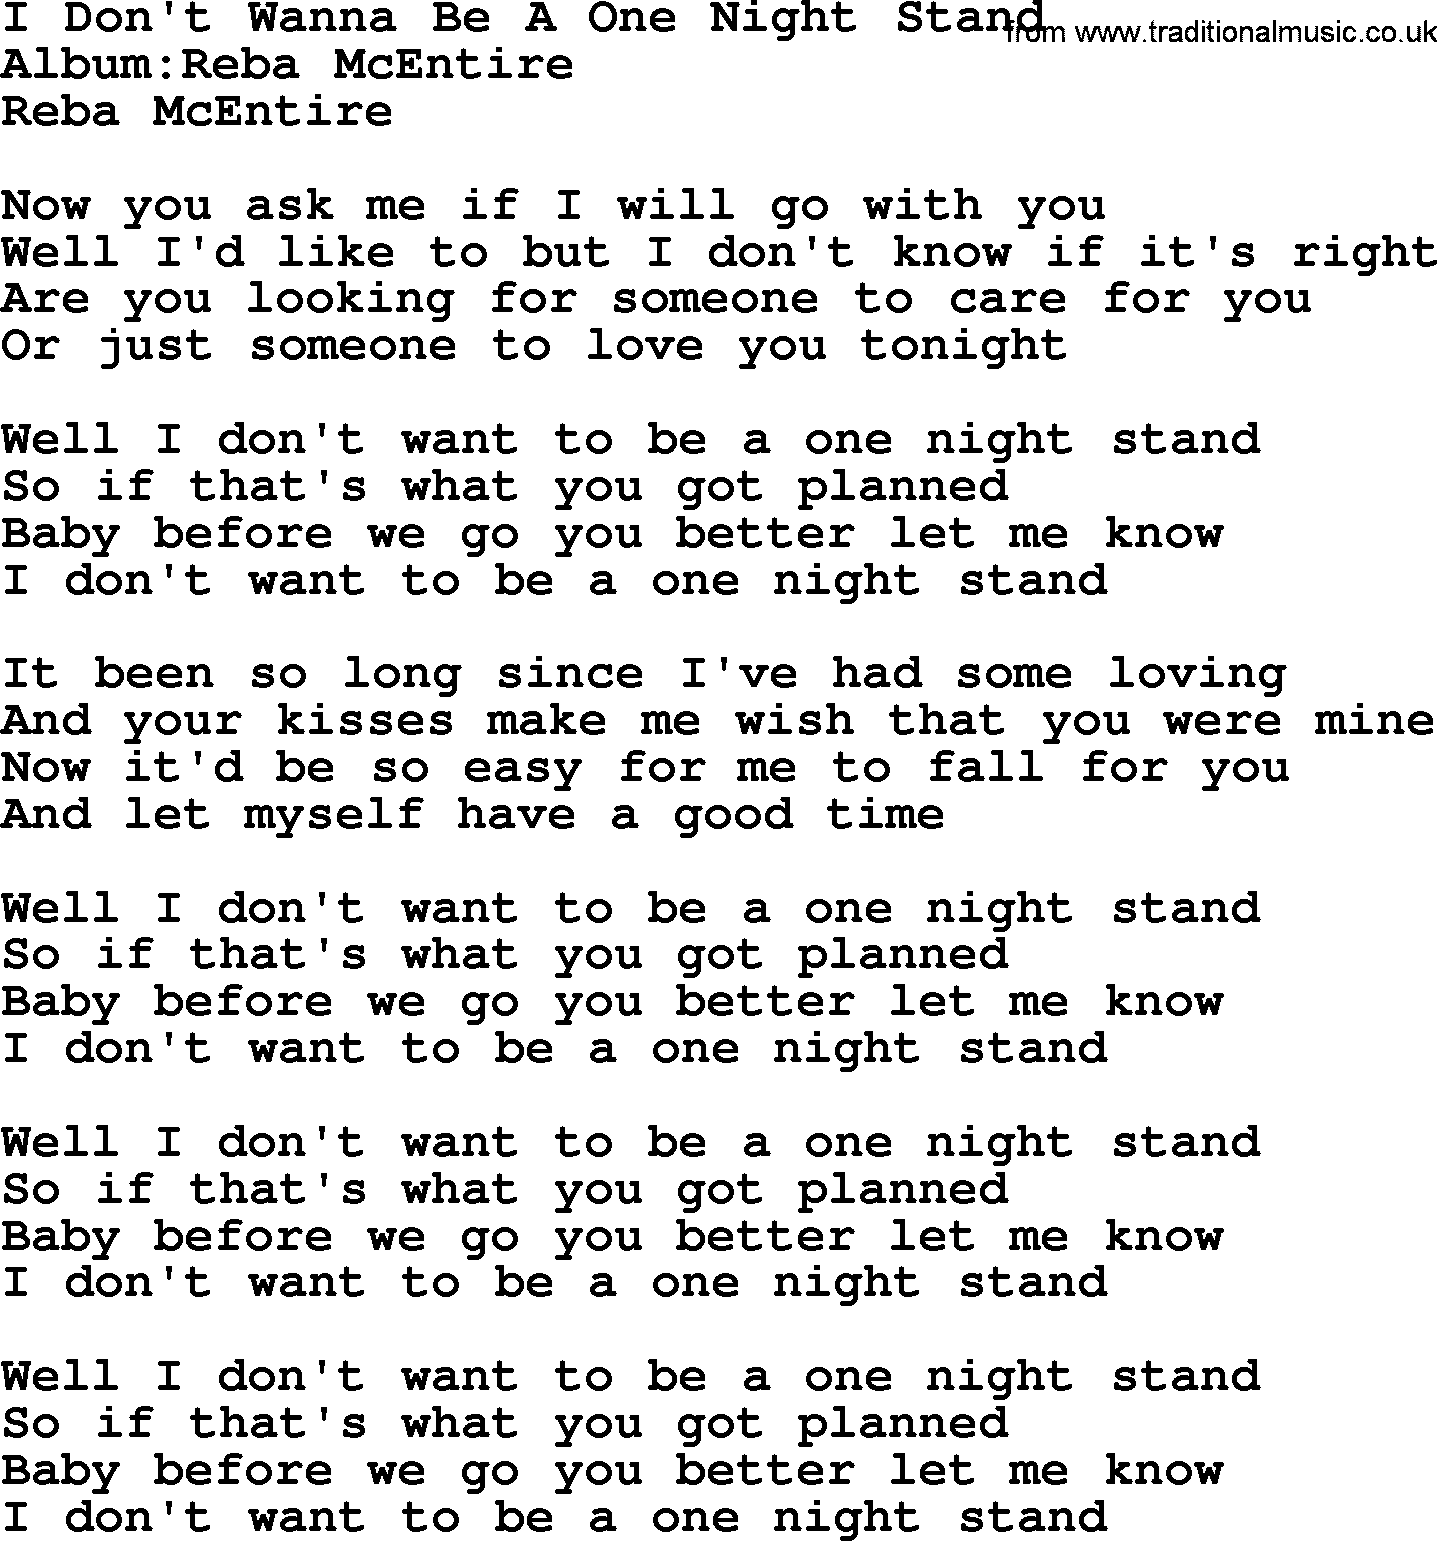 Reba McEntire song: I Don't Wanna Be A One Night Stand lyrics